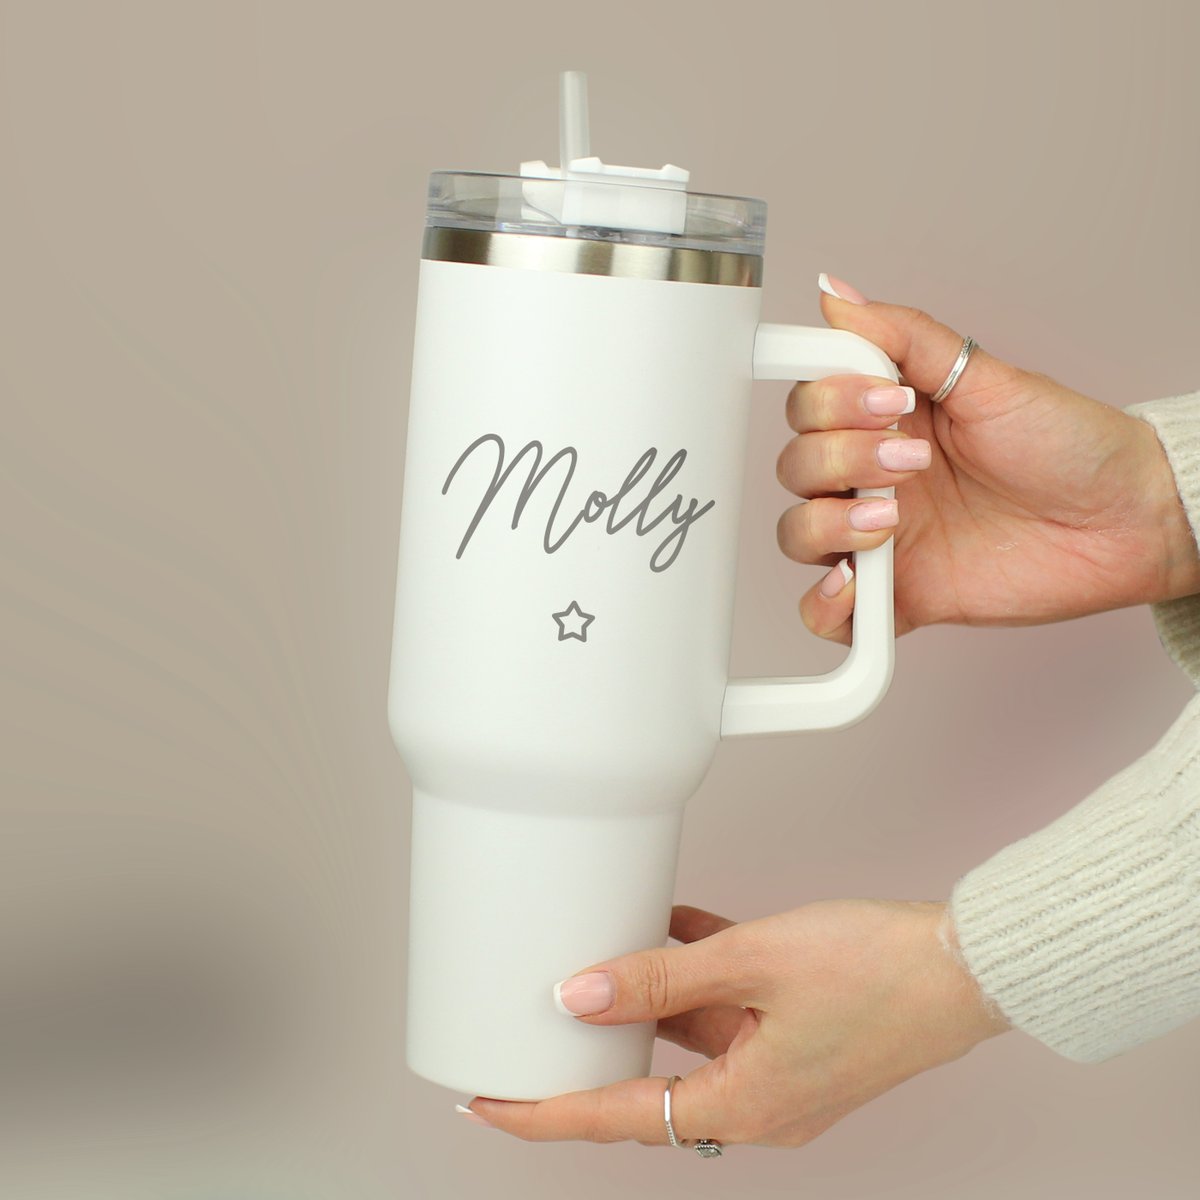 Big enough for any thirst, this personalised travel cup has been designed to keep your drinks piping hot or refreshingly cold for hours on end. Personalised with any name lilybluestore.com/products/perso…

#travelmug #giftideas #shopindie #mhhsbd